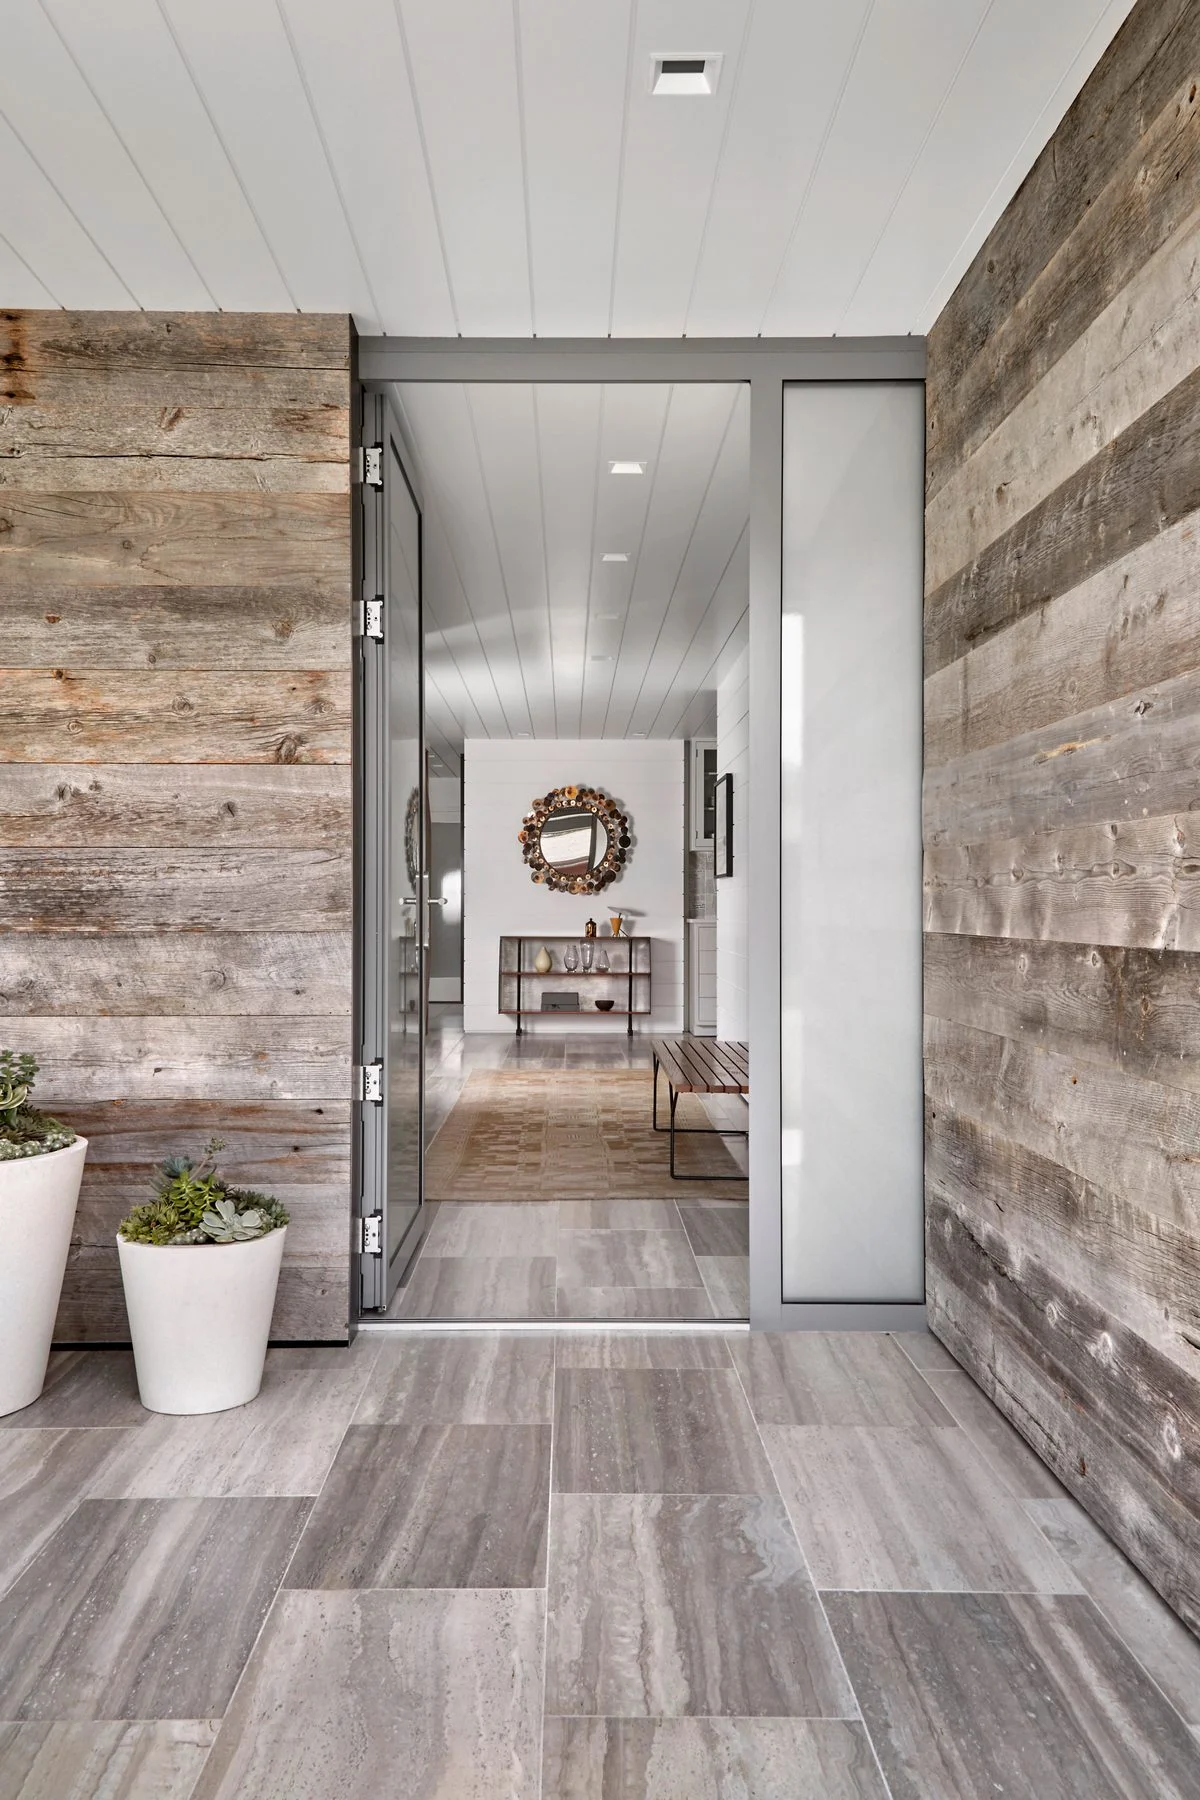 Constructual Document Preparation for Home Construction in Jackson, Wyoming by Studio 250 Design